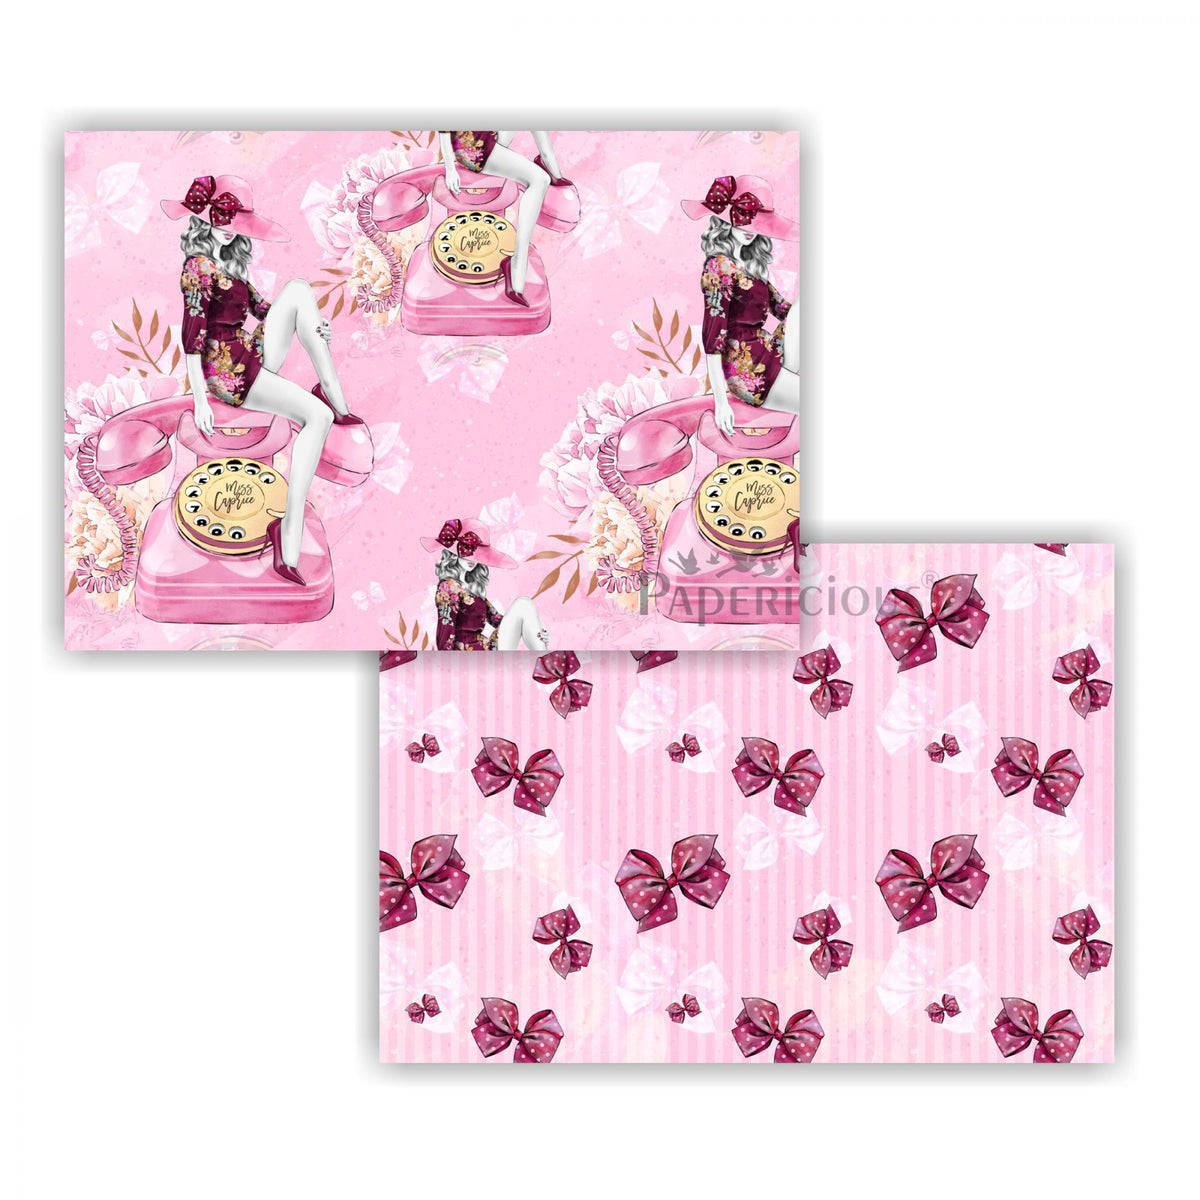 Papericious - Decoupage Papers - Miss Caprice - A4 size